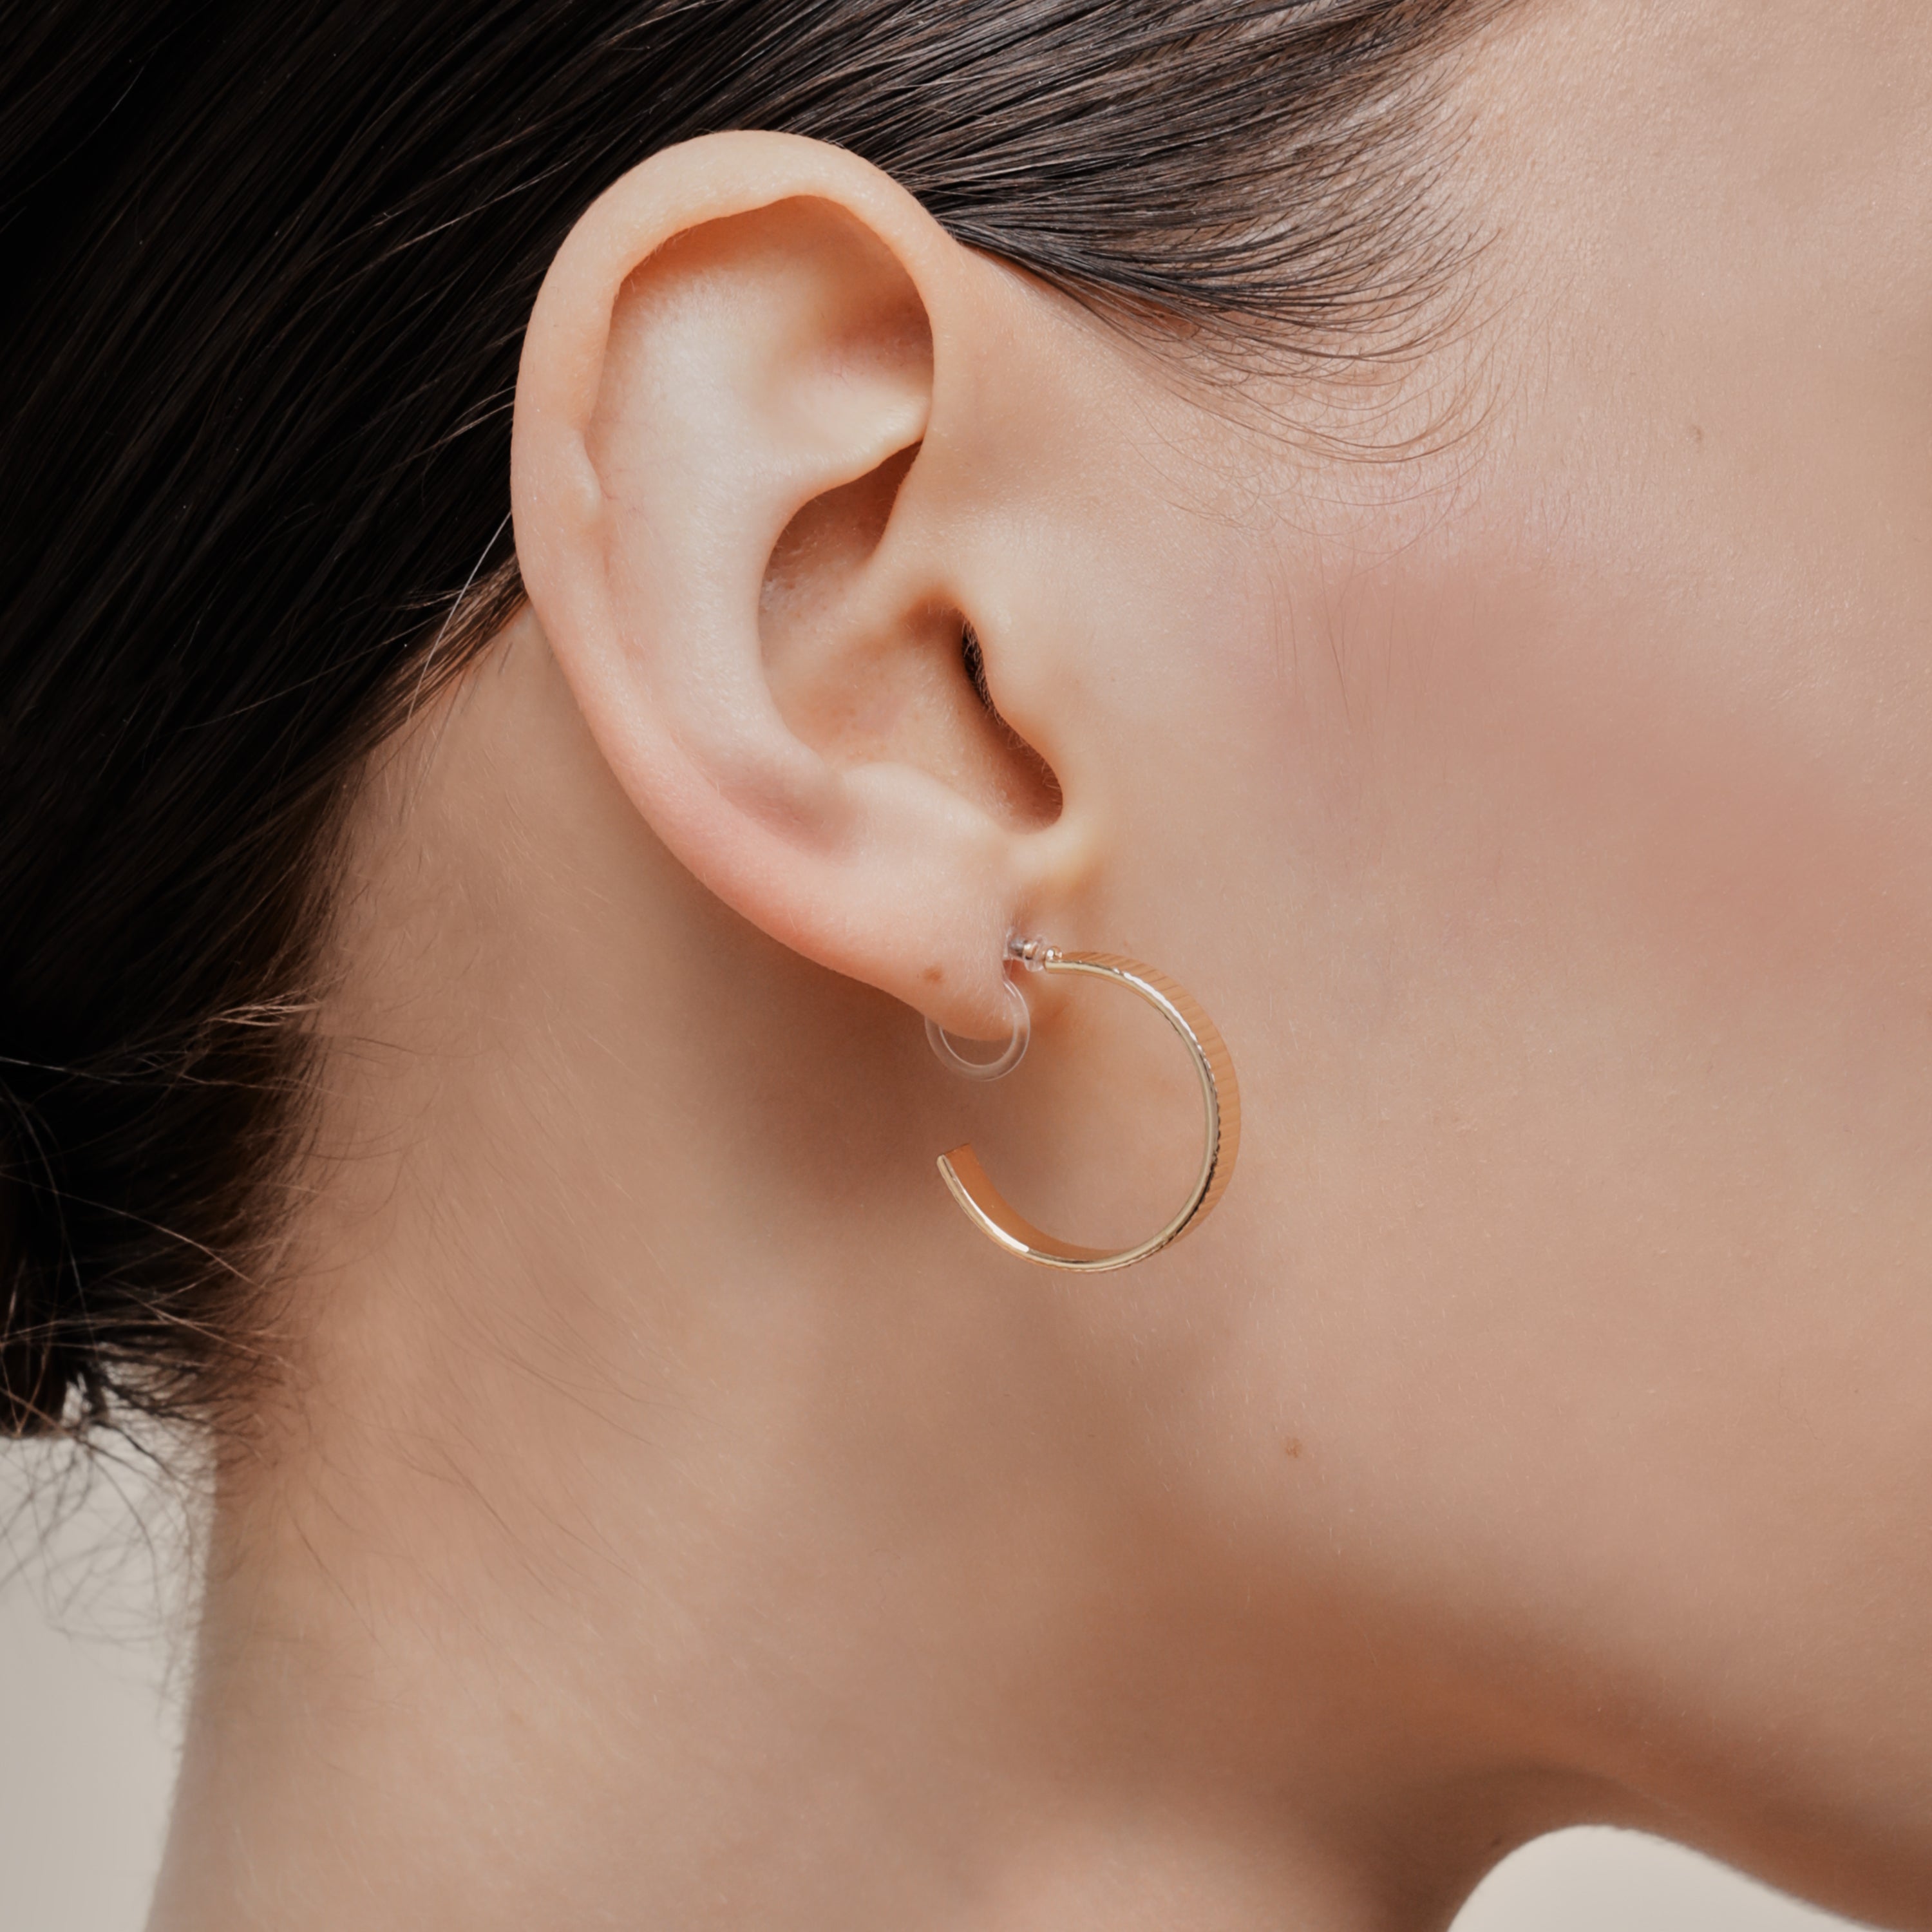 A model wearing the Pleated Hoop Clip On Earrings in Gold offer a resin clip-on closure for a secure and comfortable fit for a variety of ear sizes and sensitivities. With an average wear duration of 8-12 hours, these earrings are perfect for all-day wear. Please note that this listing is for a single pair